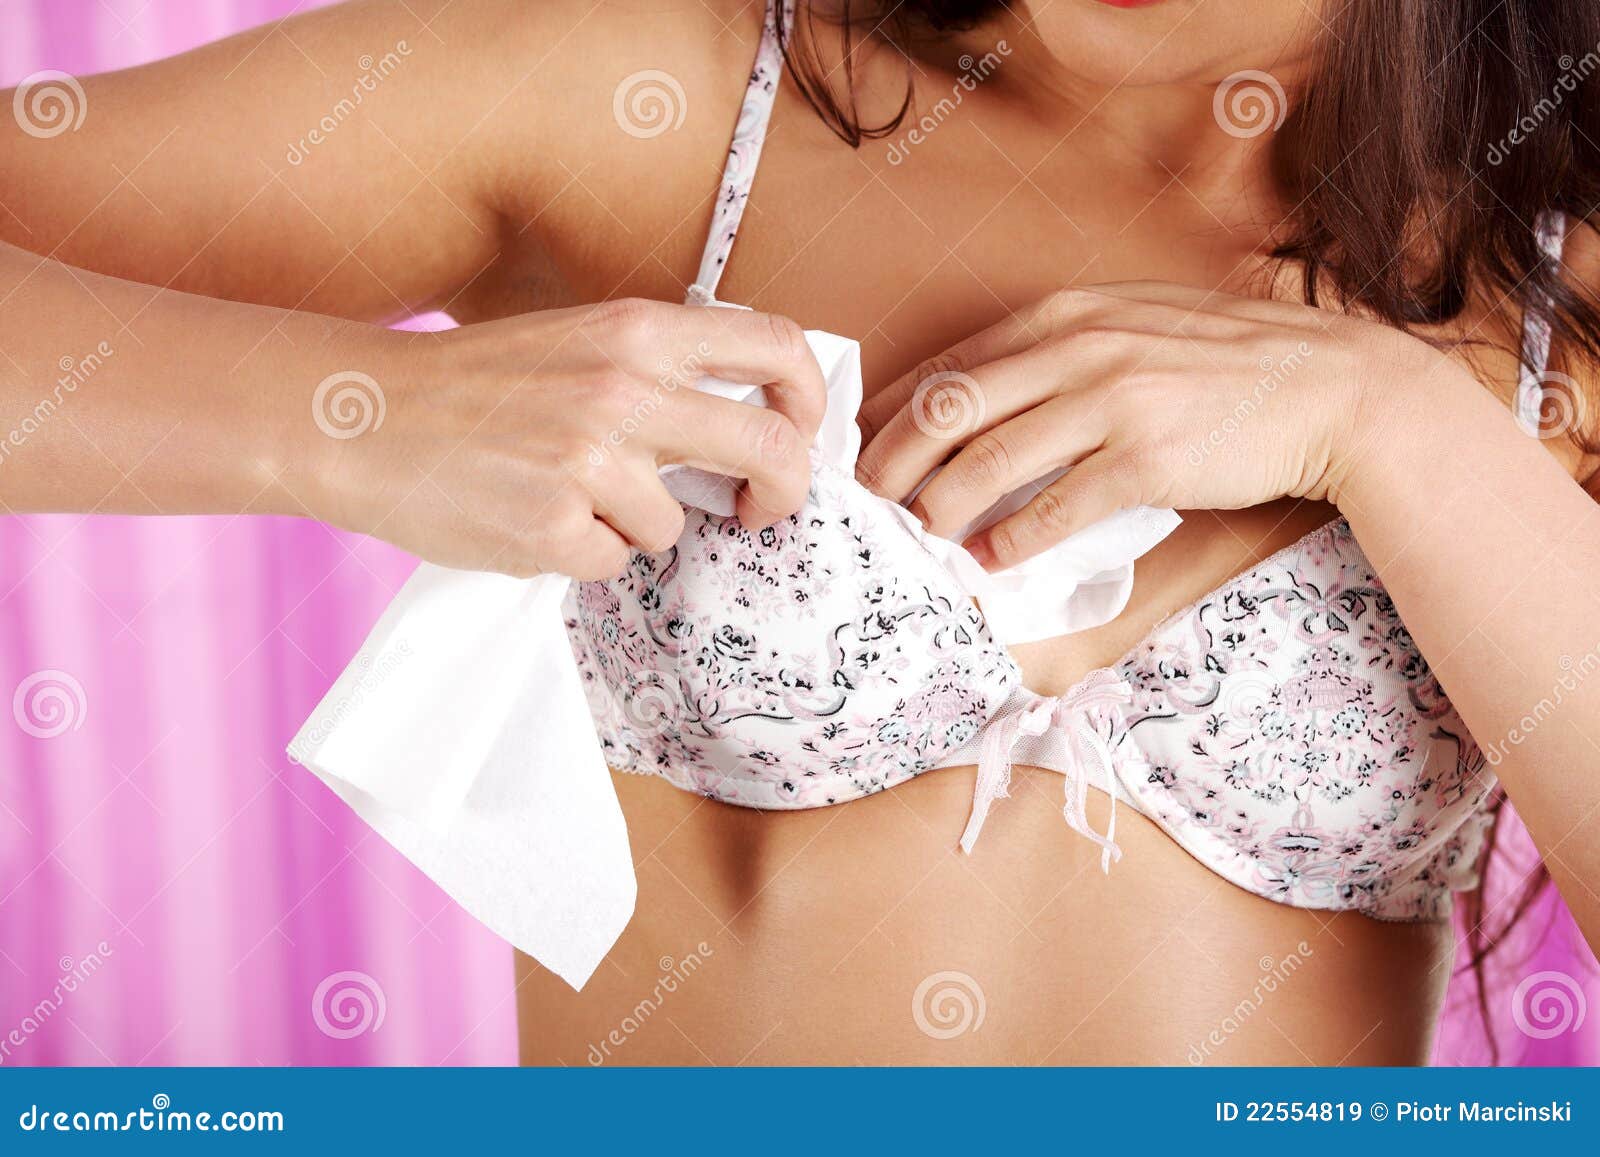 Woman Stuffing Bra with Tissue Stock Image - Image of figure